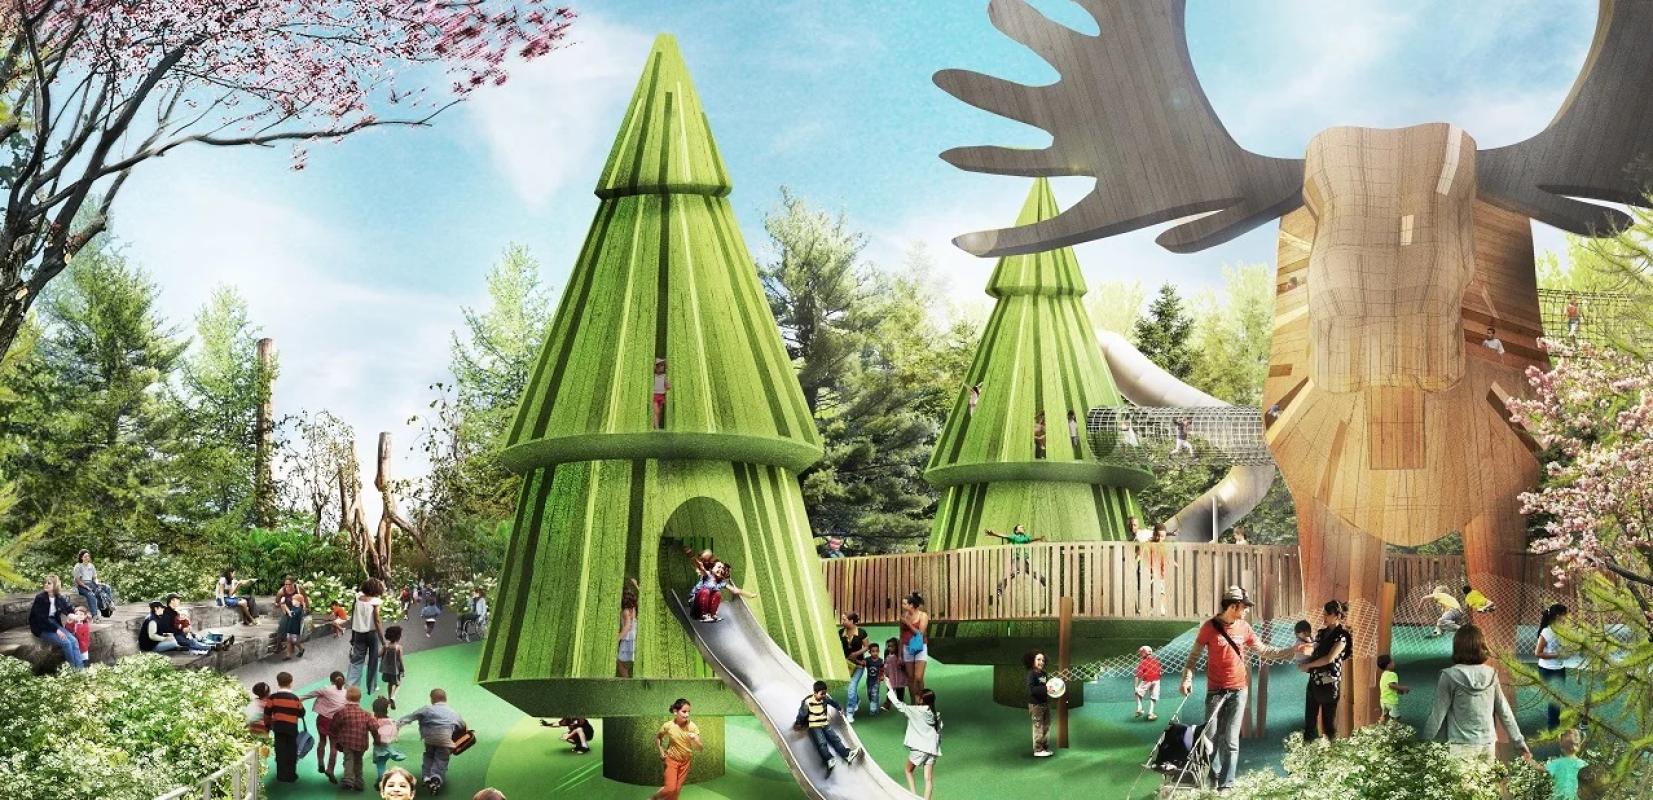 a busy playground and giant moose structures shown in an artist rendering